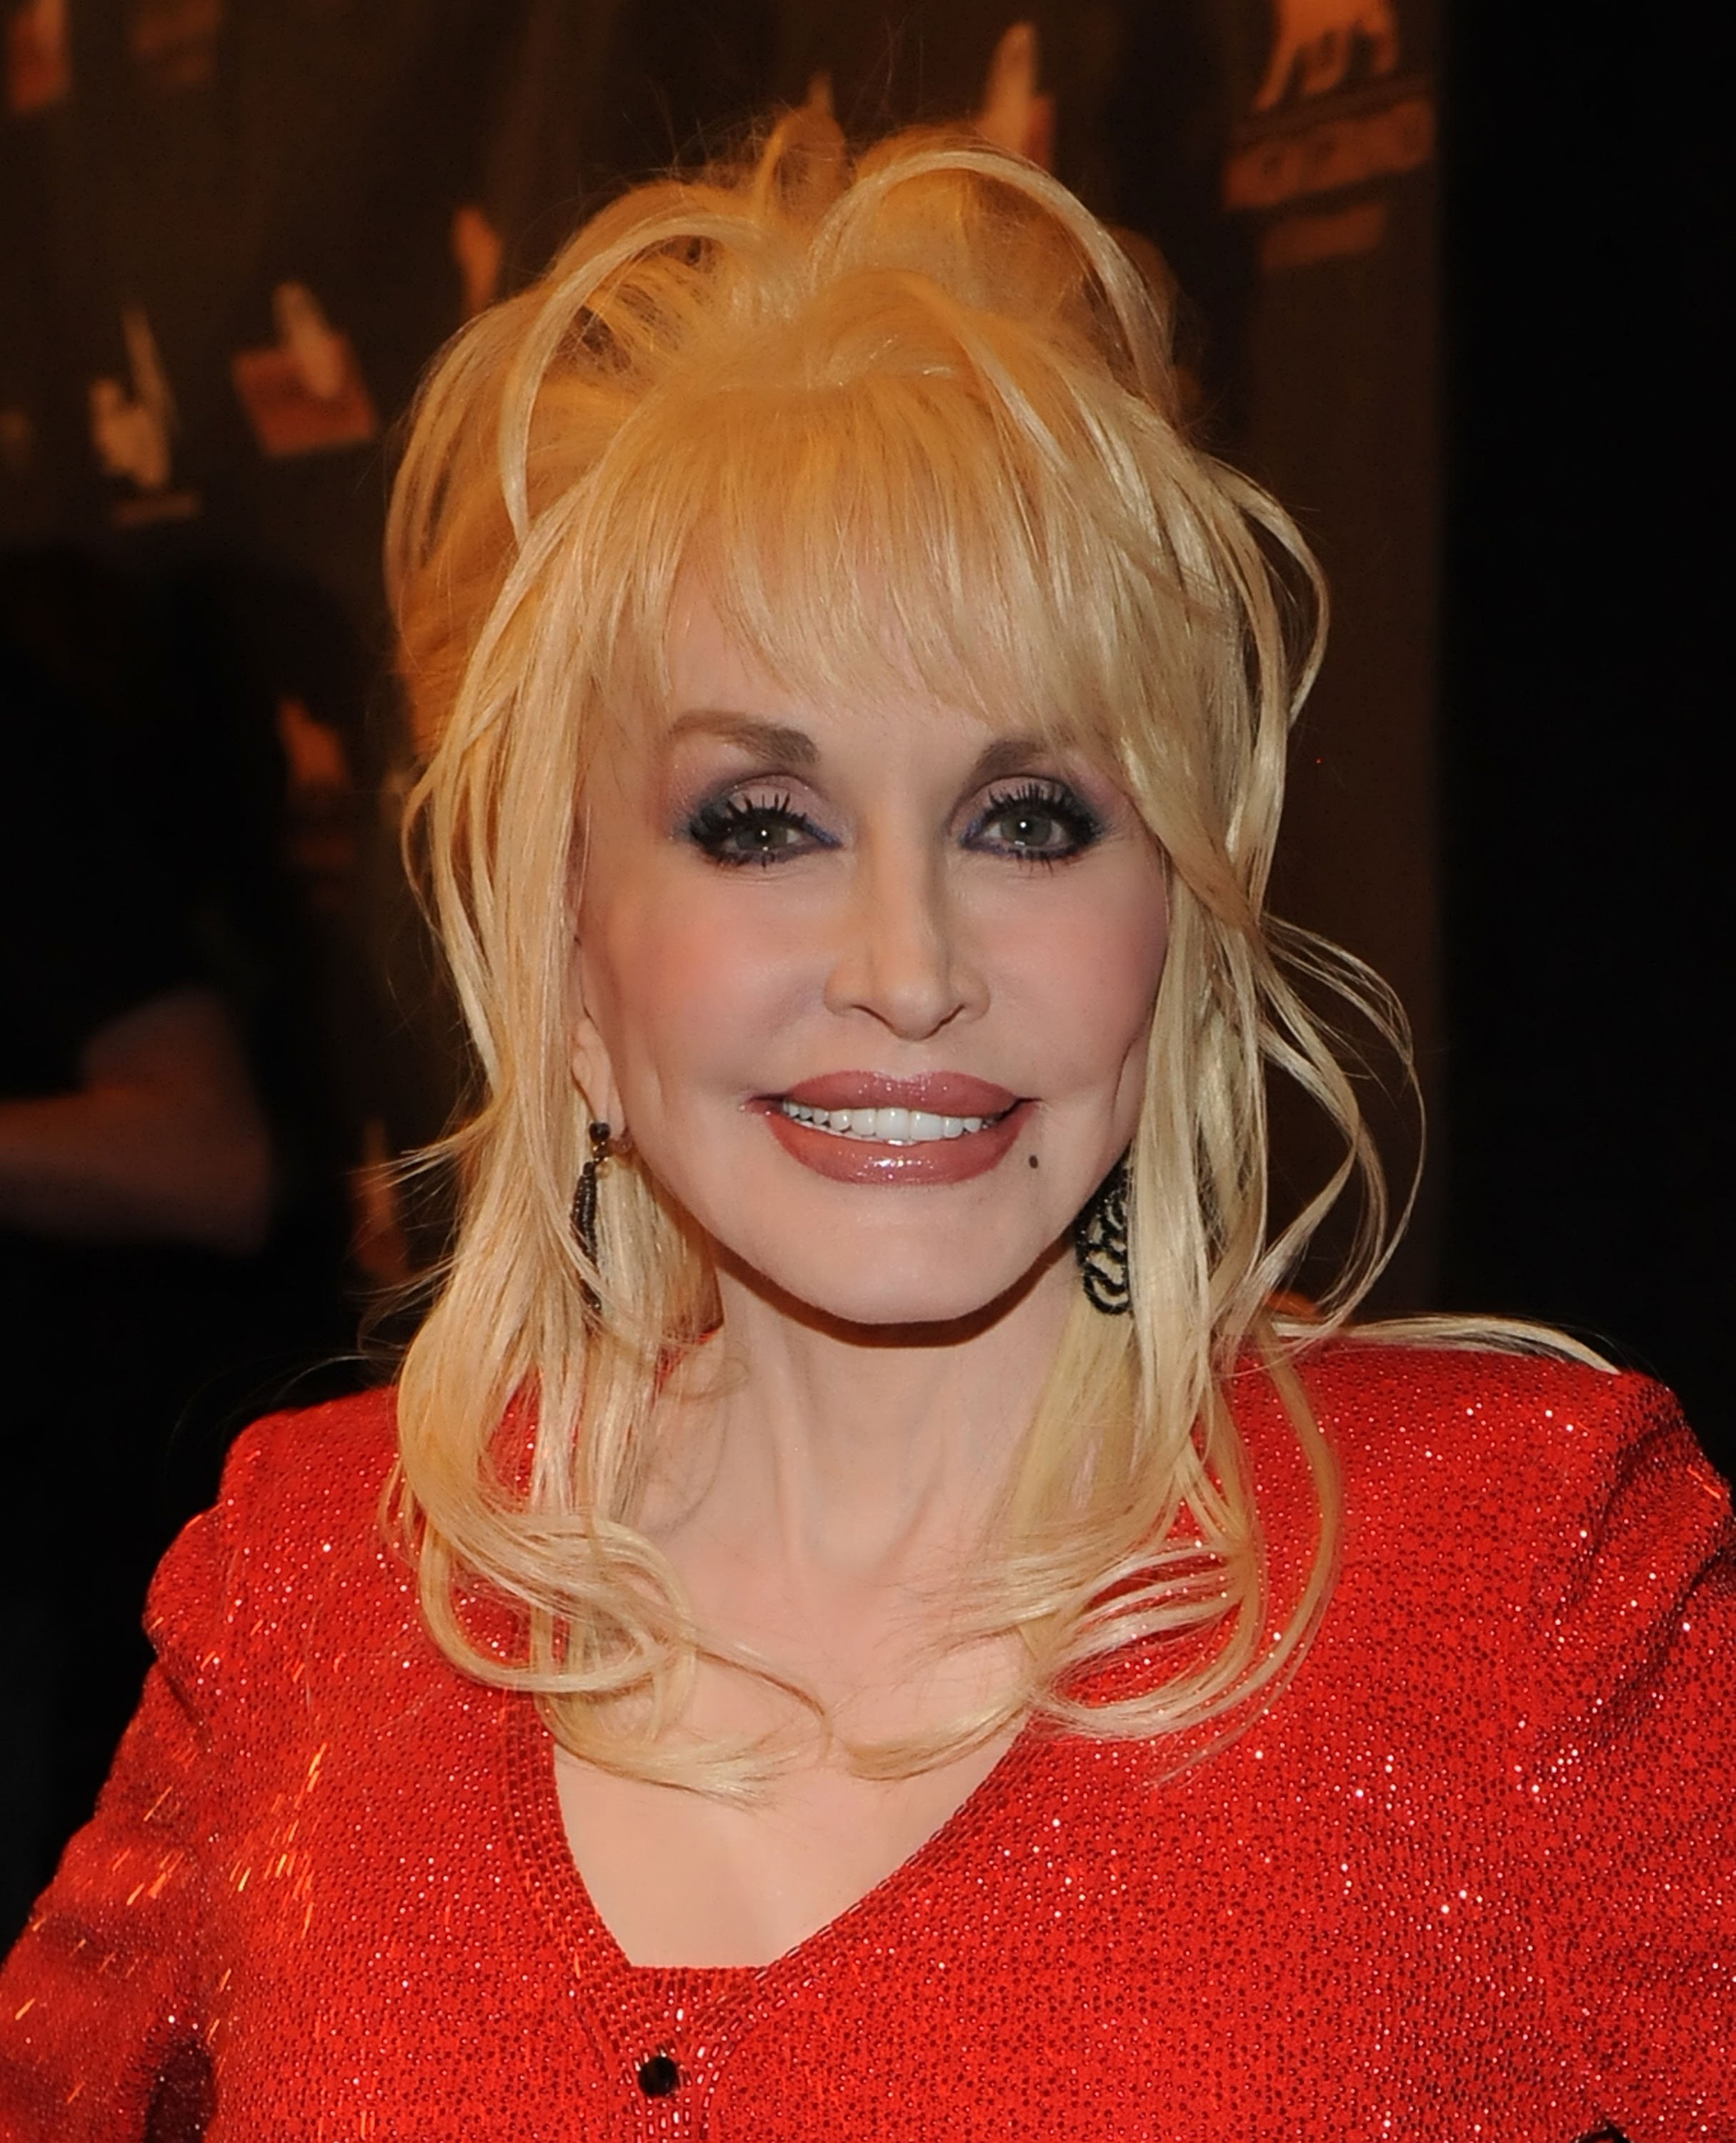  Dolly Parton attends the Kenny Rogers: The First 50 Years award show on April 10, 2010, in Ledyard Center, Connecticut. | Source: Getty Images.